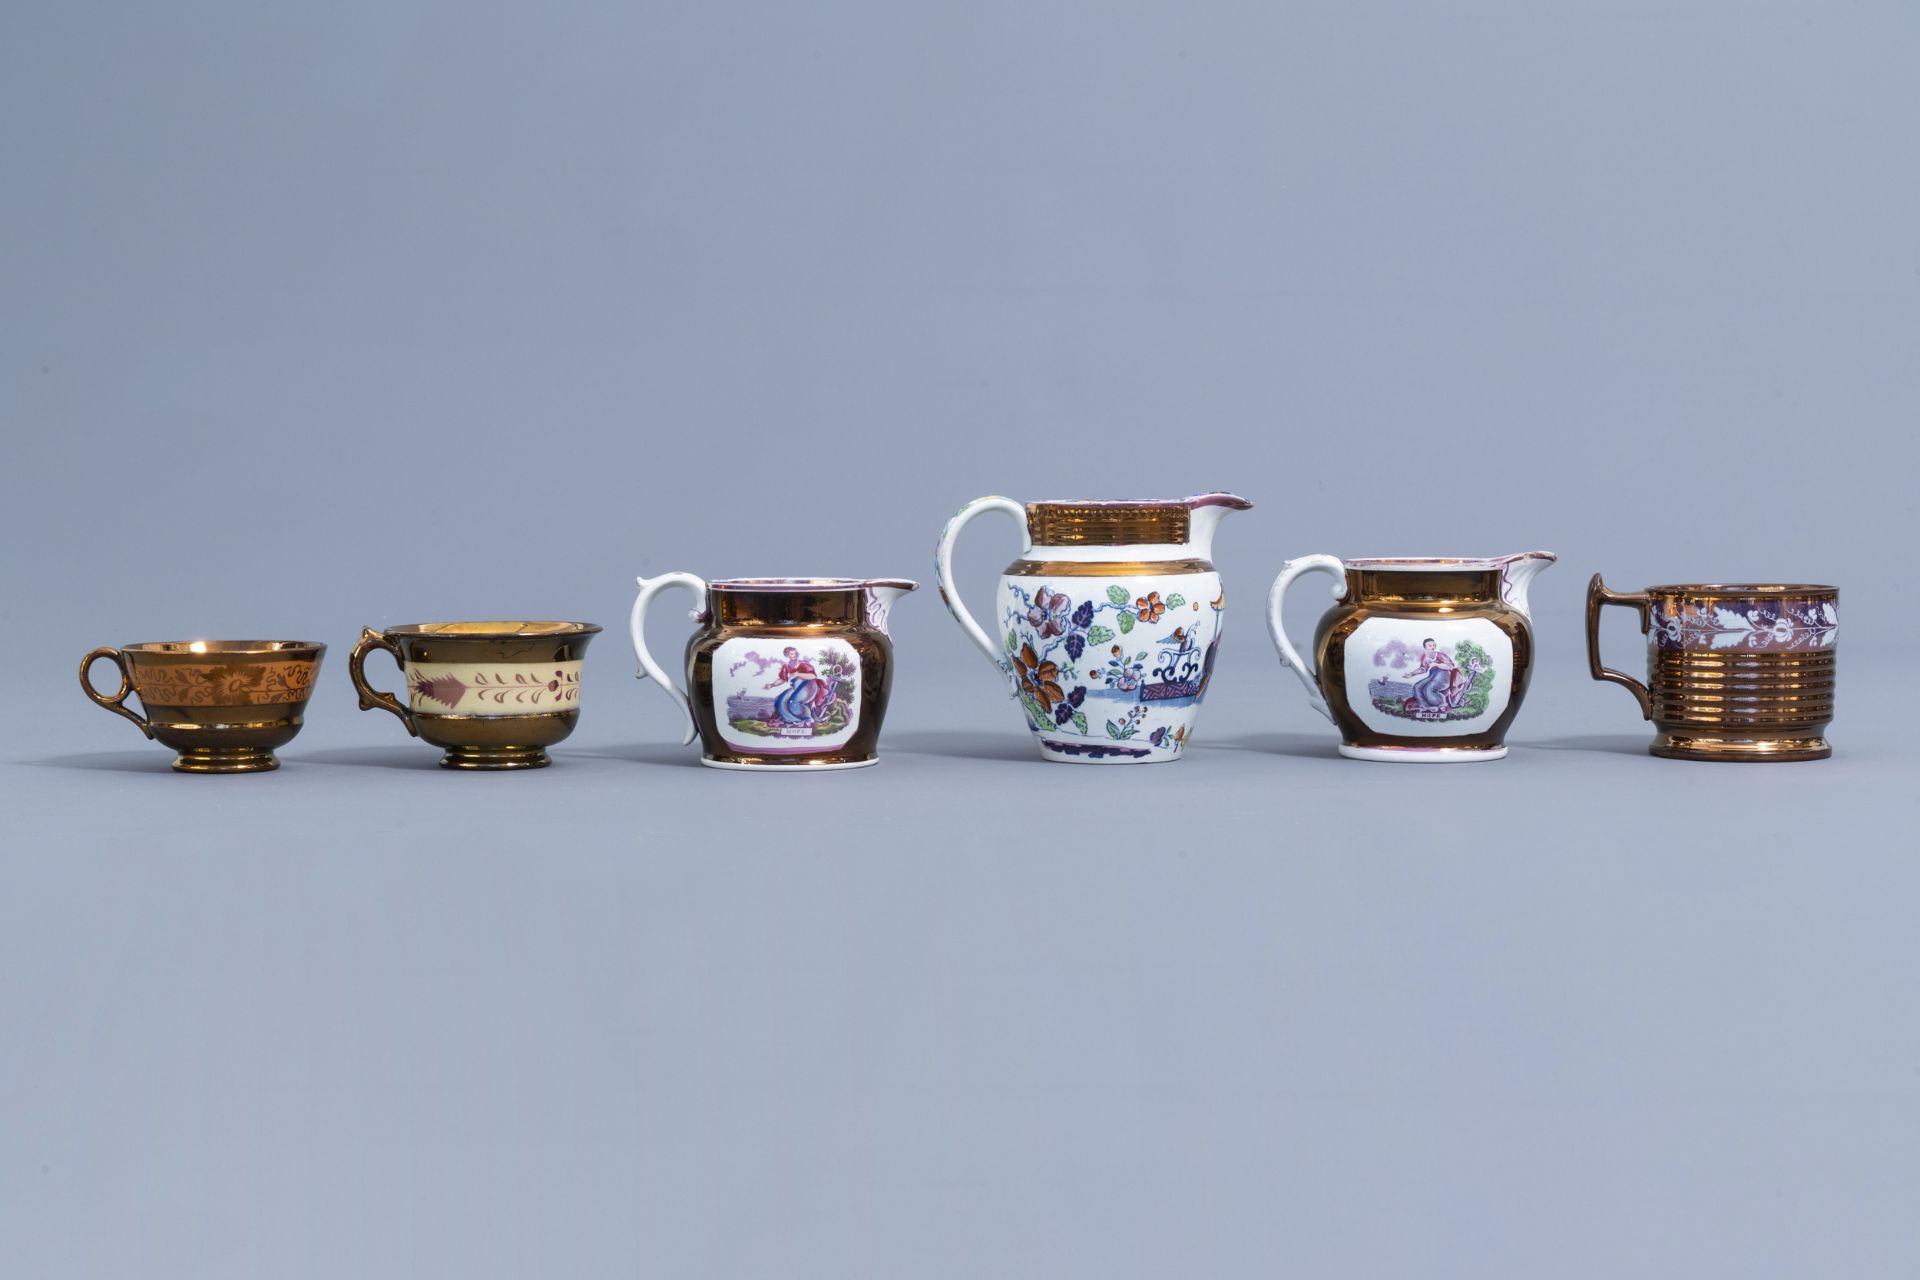 A varied collection of English lustreware items, 19th C. - Image 16 of 44